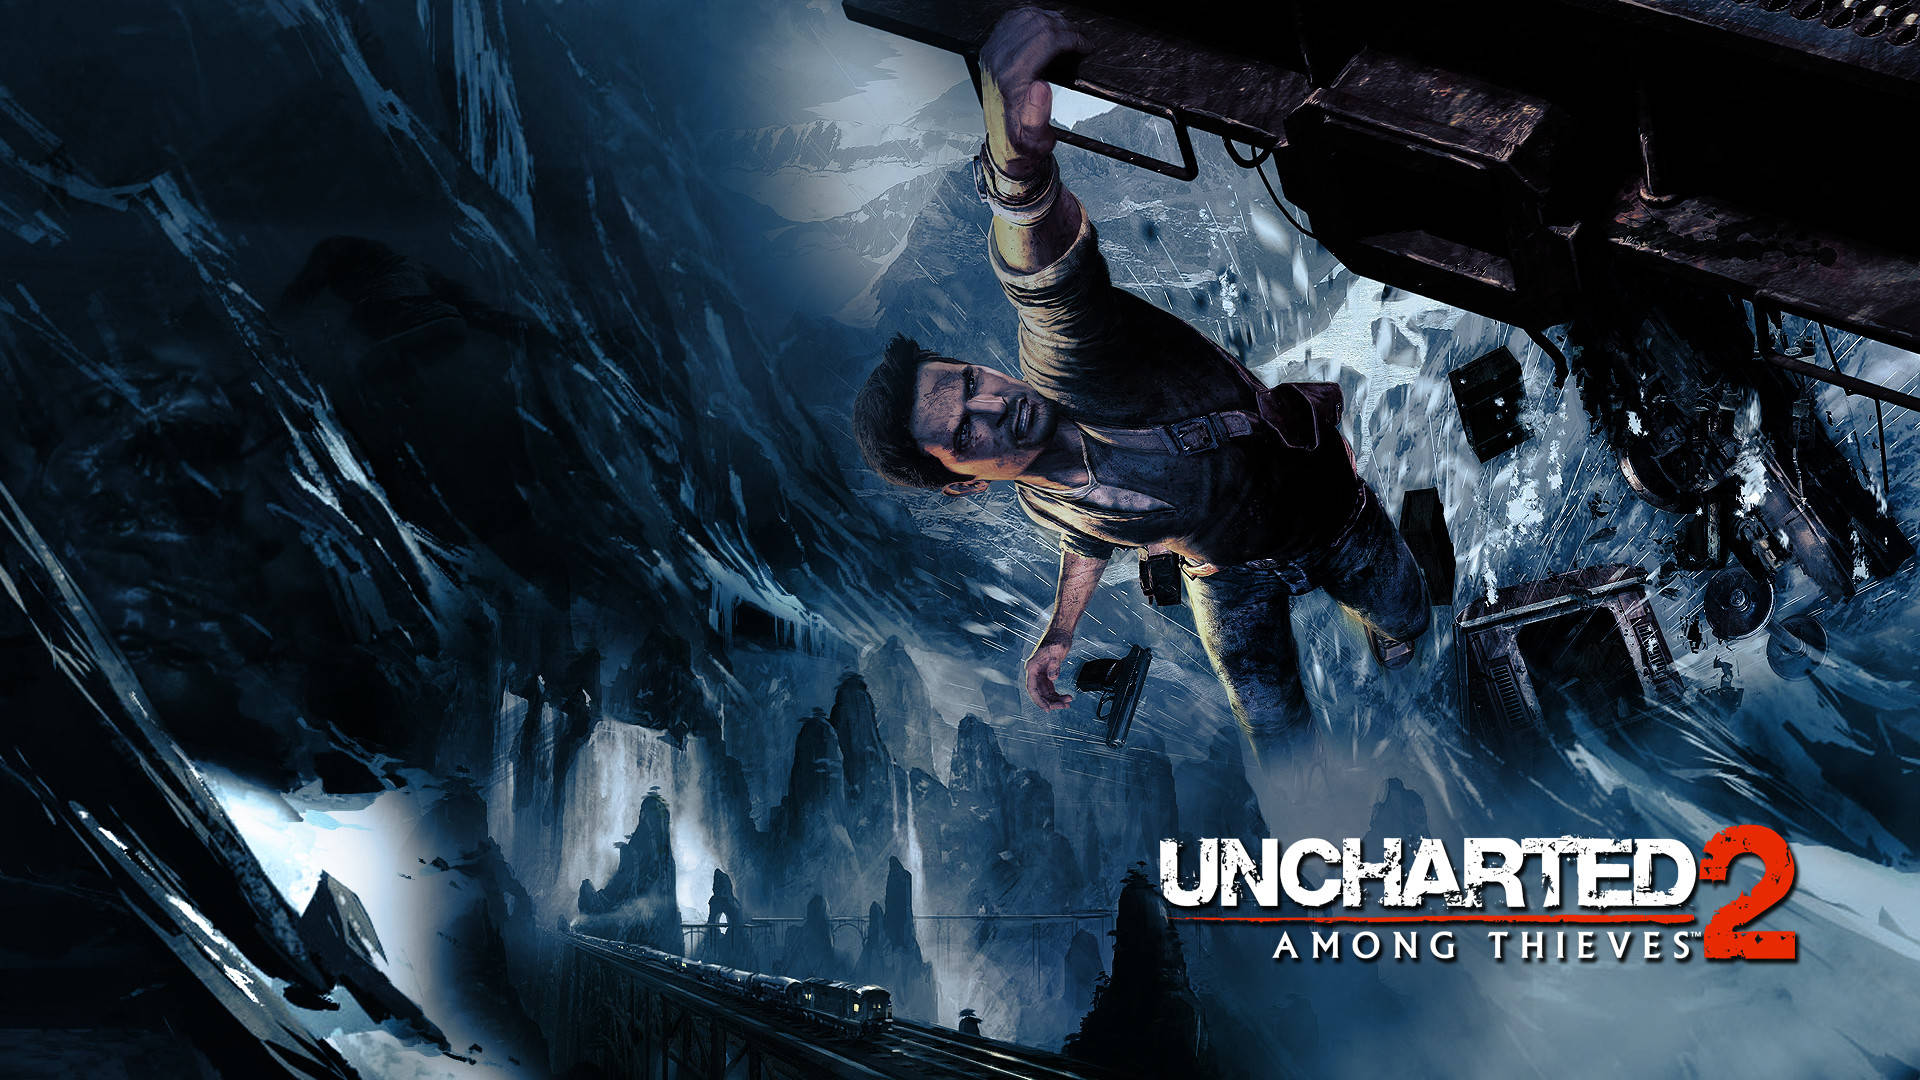 Ps3 Uncharted Among Thieves 2 Background